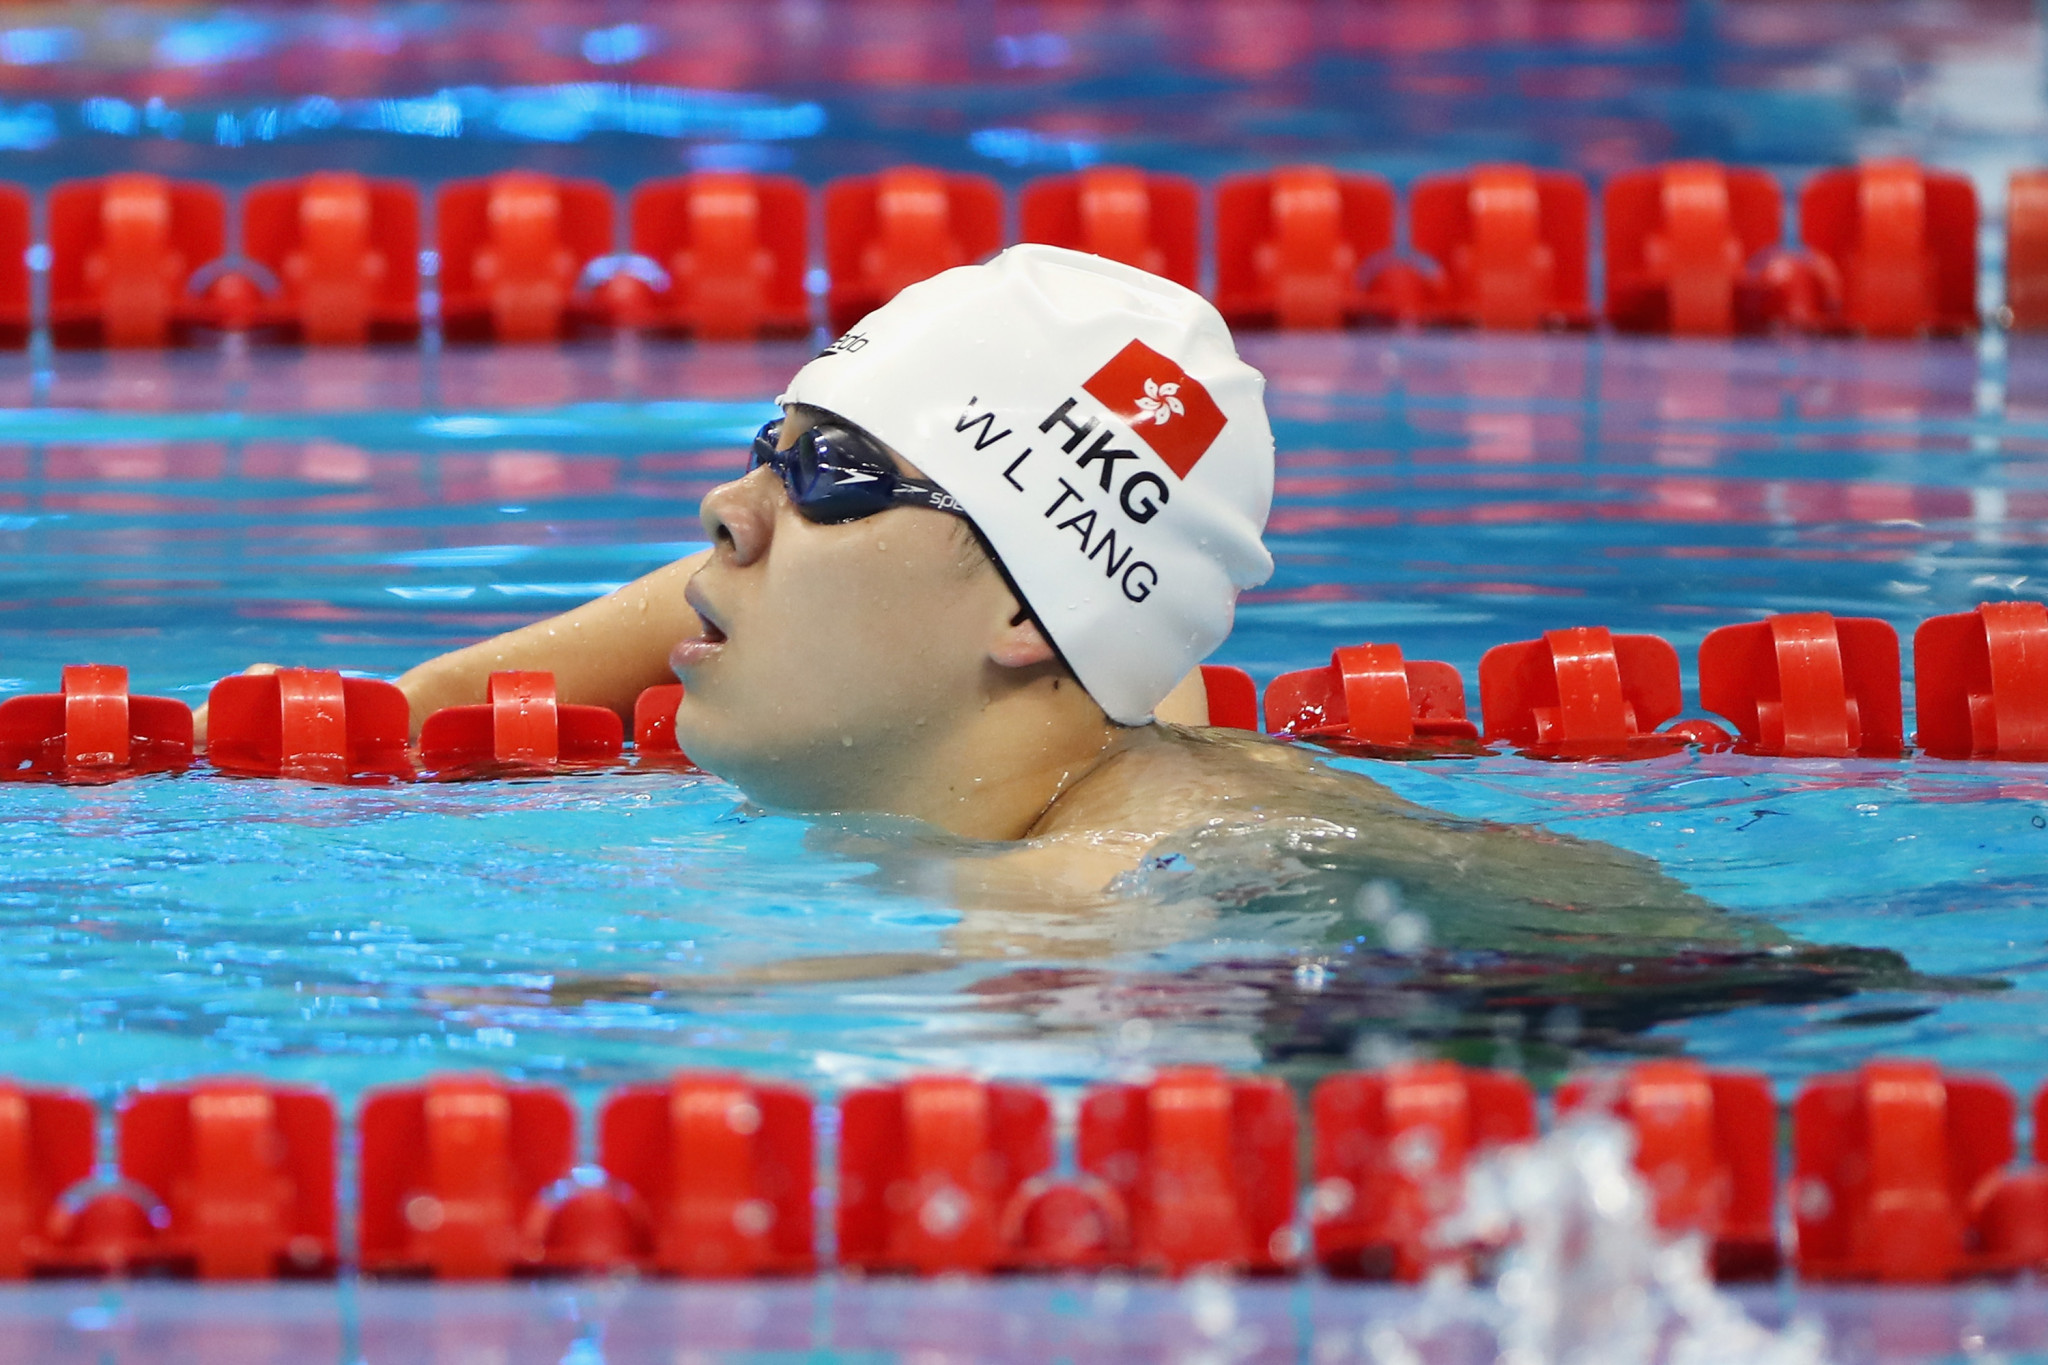 Tang Wai-lok is one of the athletes confirmed as part of the Hong Kong team for Tokyo 2020 ©Getty Images